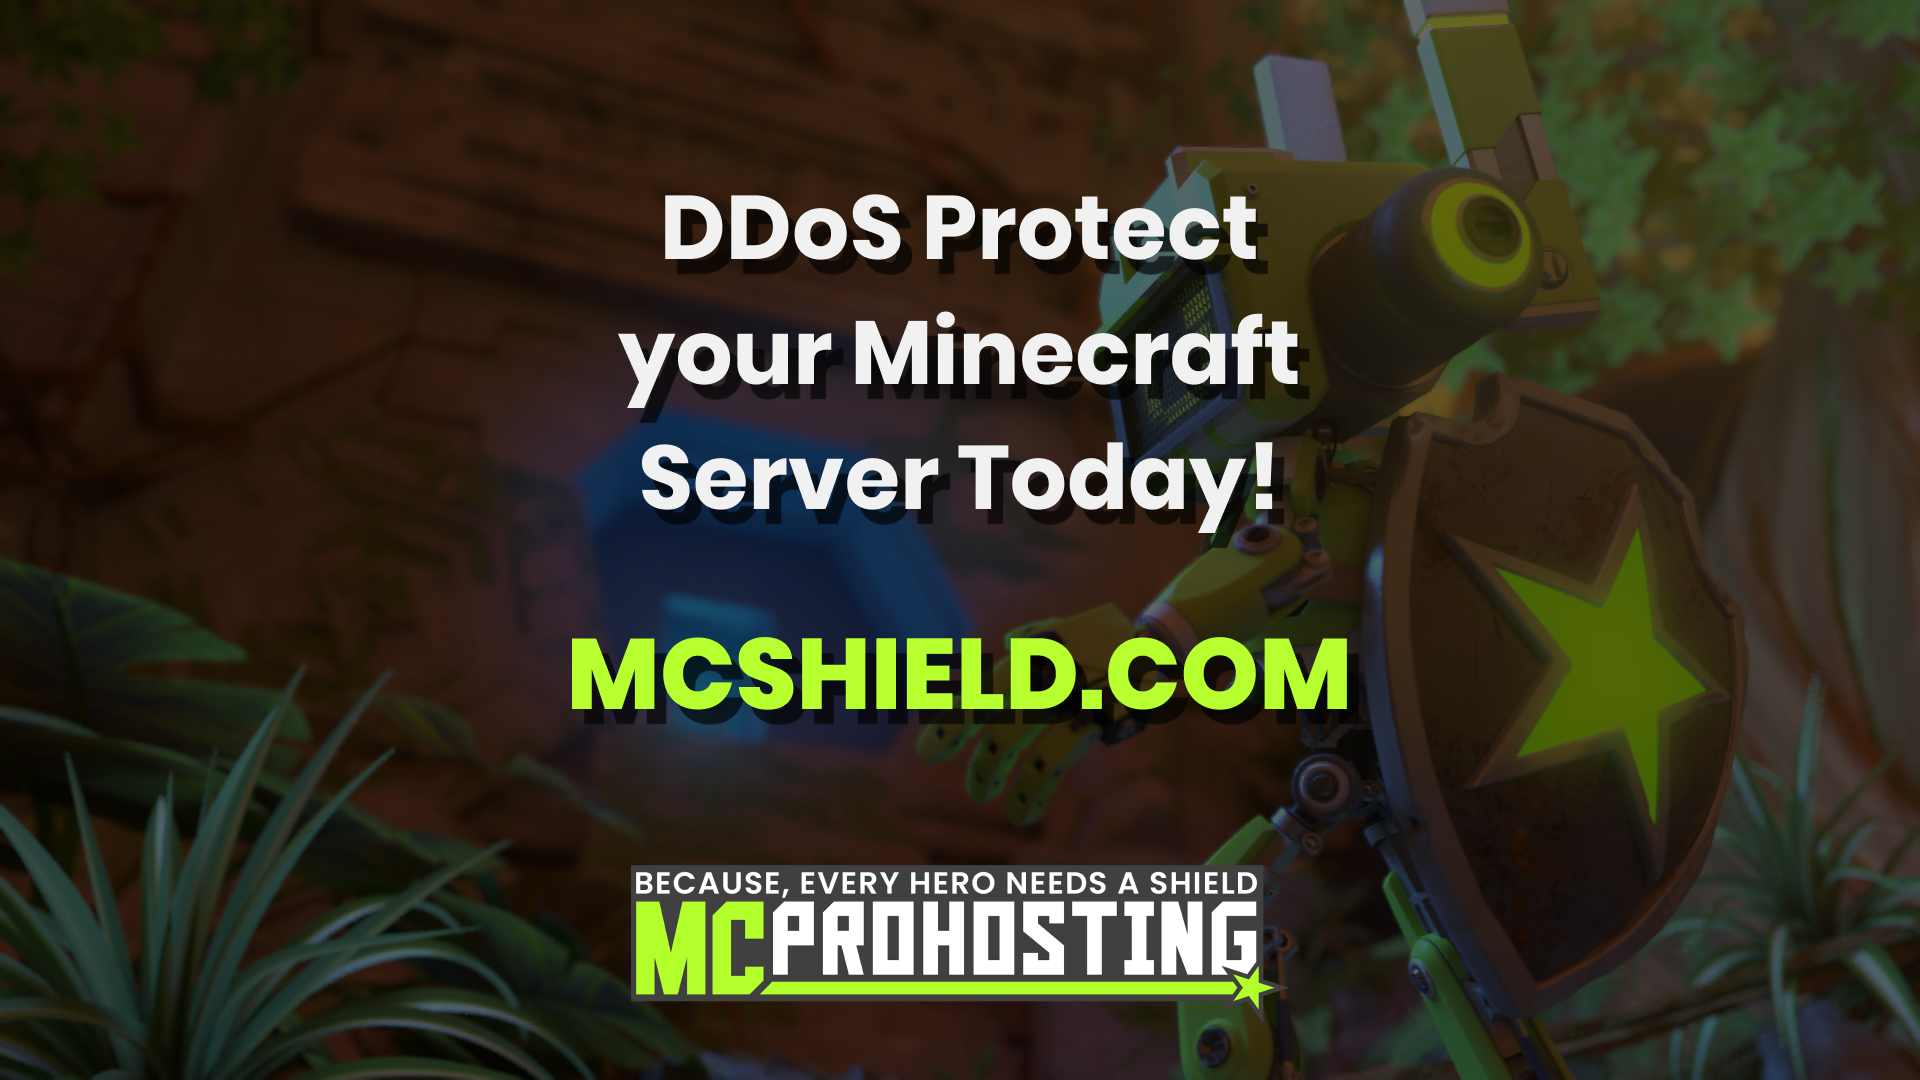 Introducing MCShield.com - DDoS Protection for all Minecraft Servers!